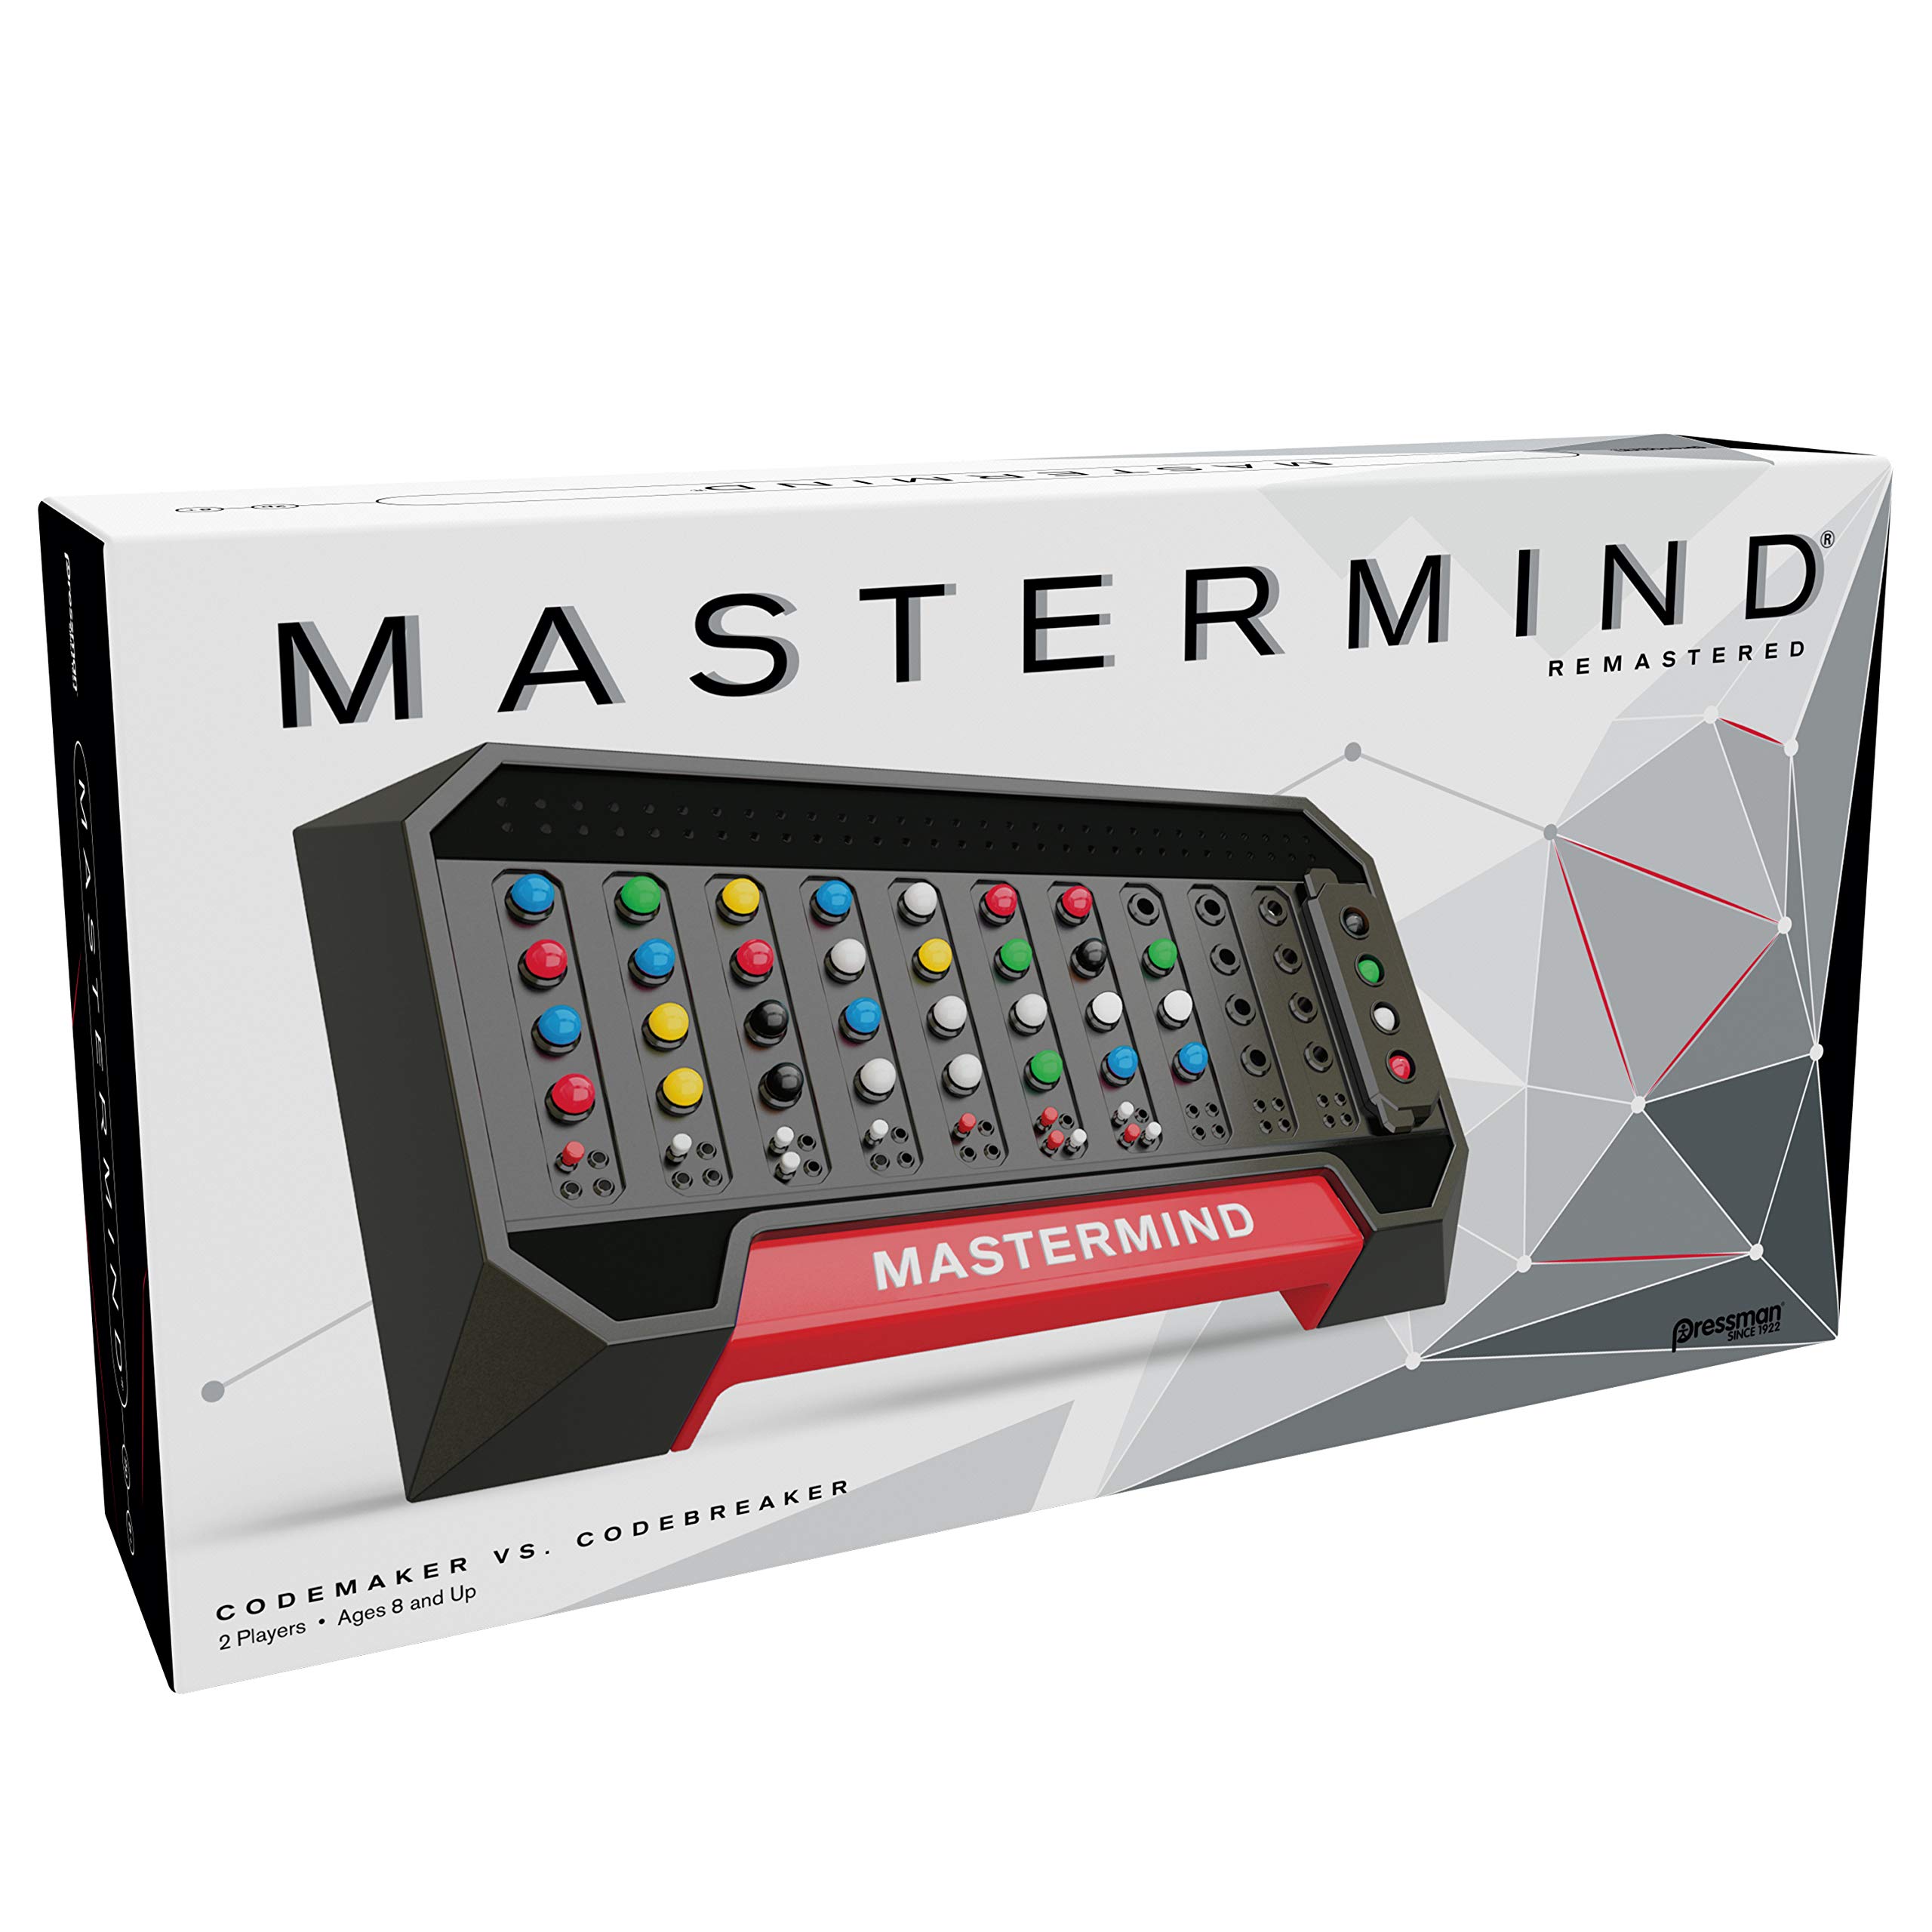 Mastermind Game : The Strategy Game of Codemaker vs. Codebreaker $7.50 + Free Shipping w/ Prime or on orders $25+